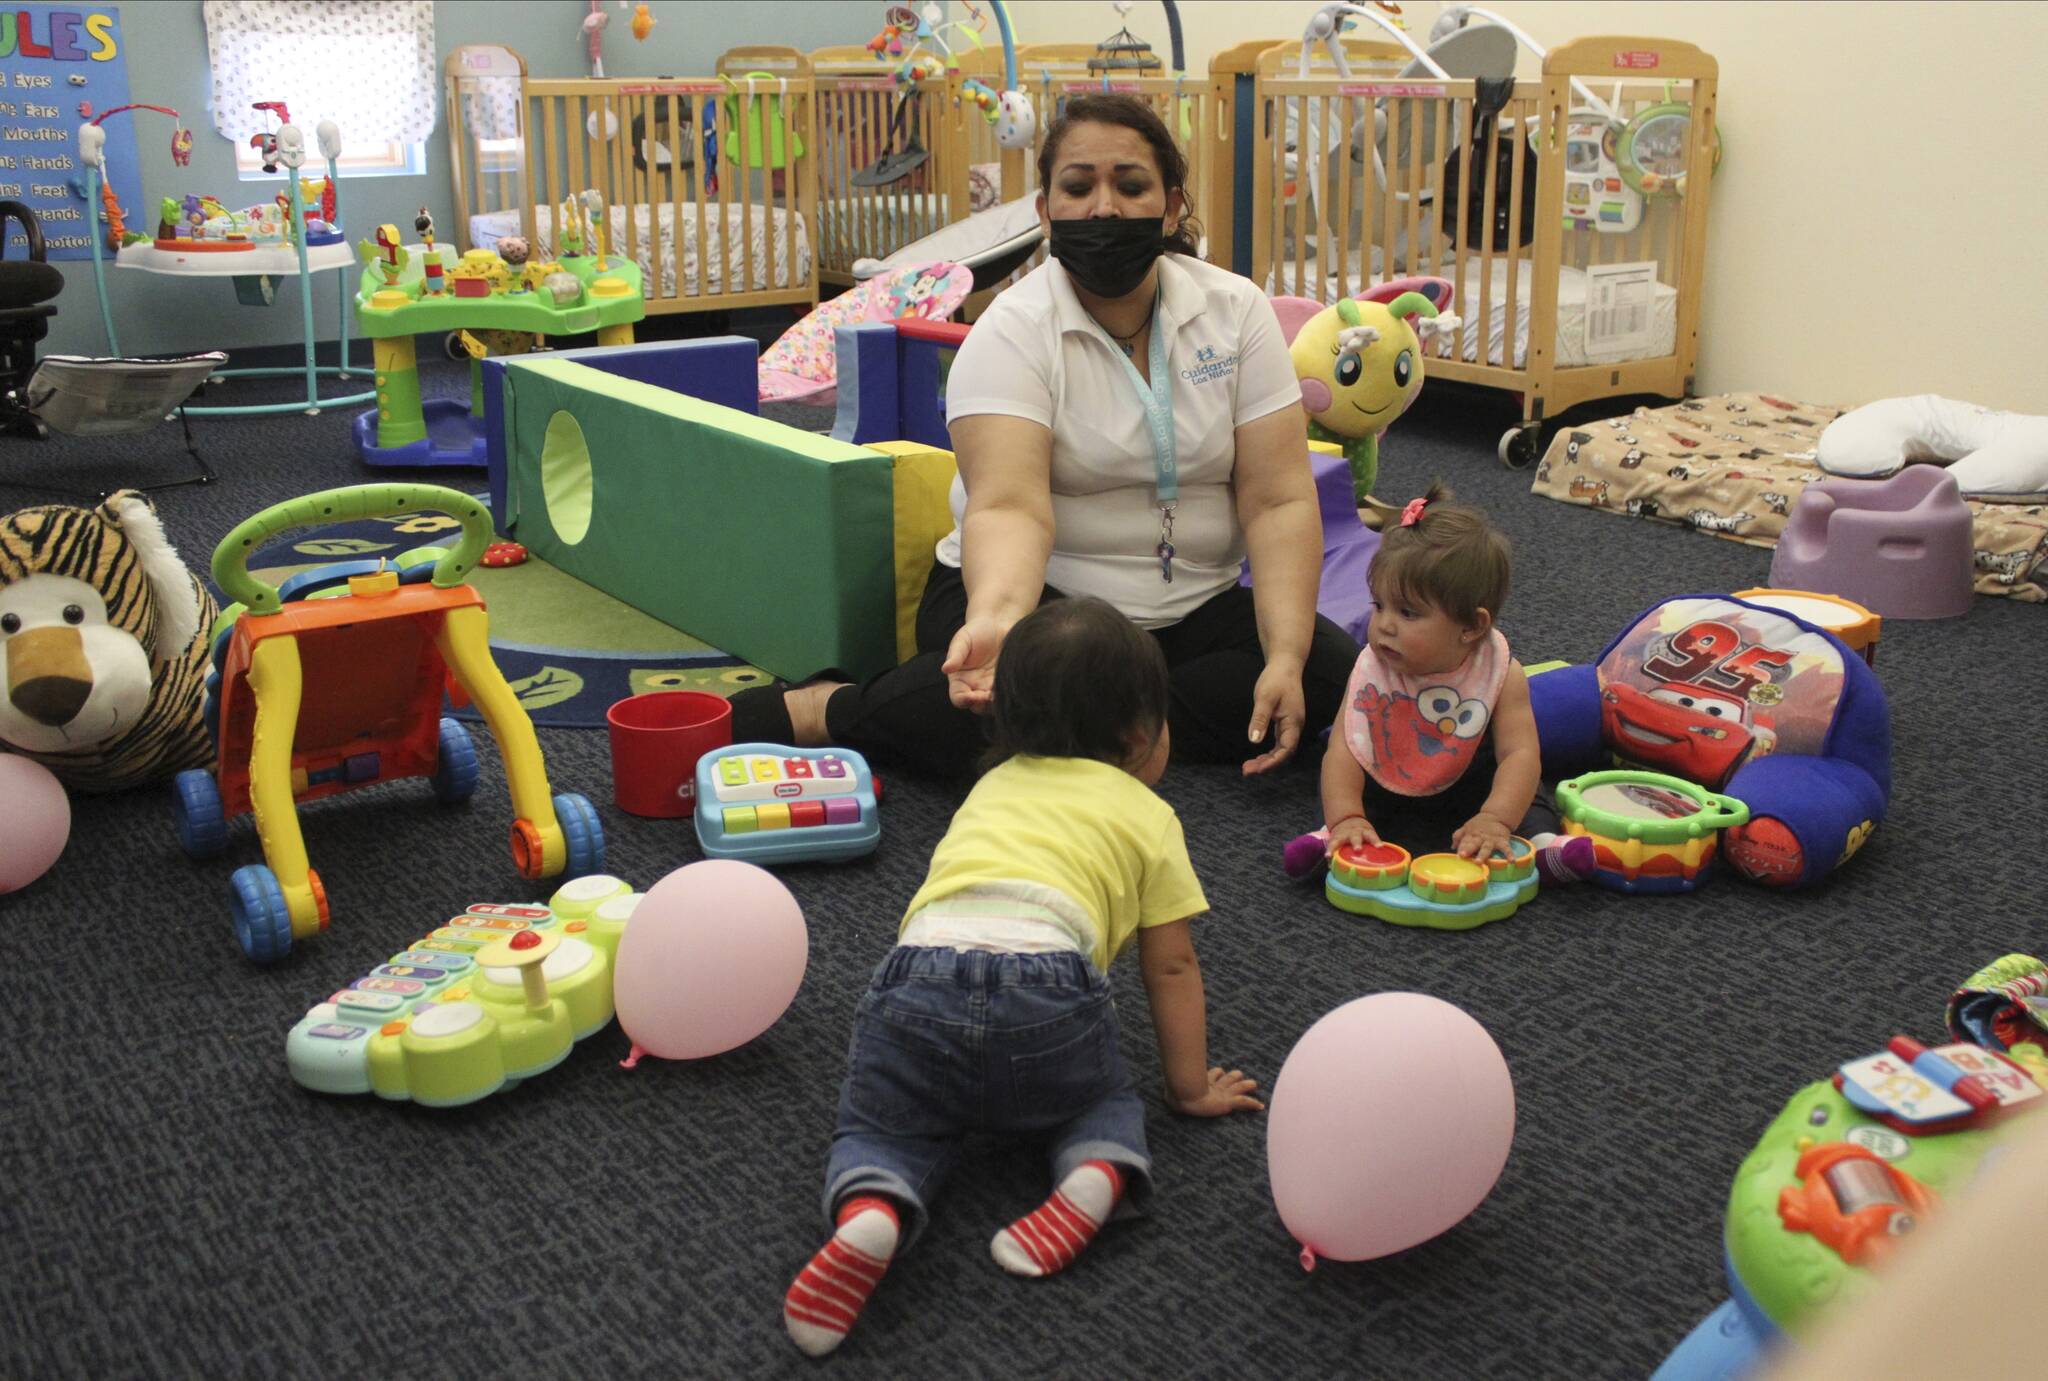 This May 4, 2021 image shows teacher Graciela Olague-Barrios working with two infants at Cuidando Los Ninos in Albuquerque, N.M. According to a recent report by the U.S. Chamber Foundation, childcare is in short supply across the country. Local experts say Juneau lacks affordable, reliable child care. (AP Photo/Susan Montoya Bryan)